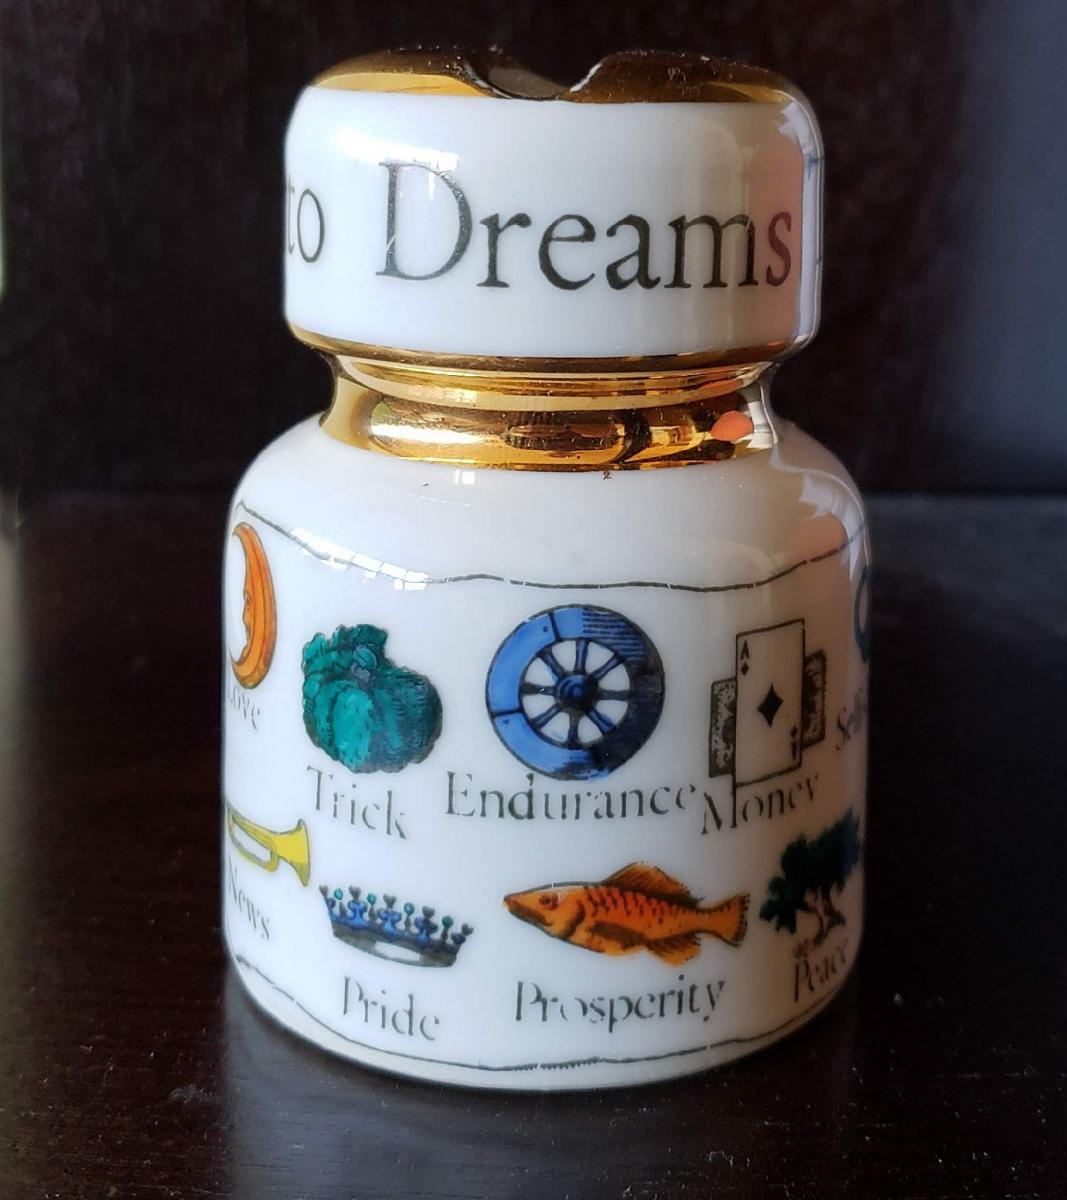 Vintage Piero Fornasetti Insulator Paperweight - The New Key To Dreams, Late 1950's